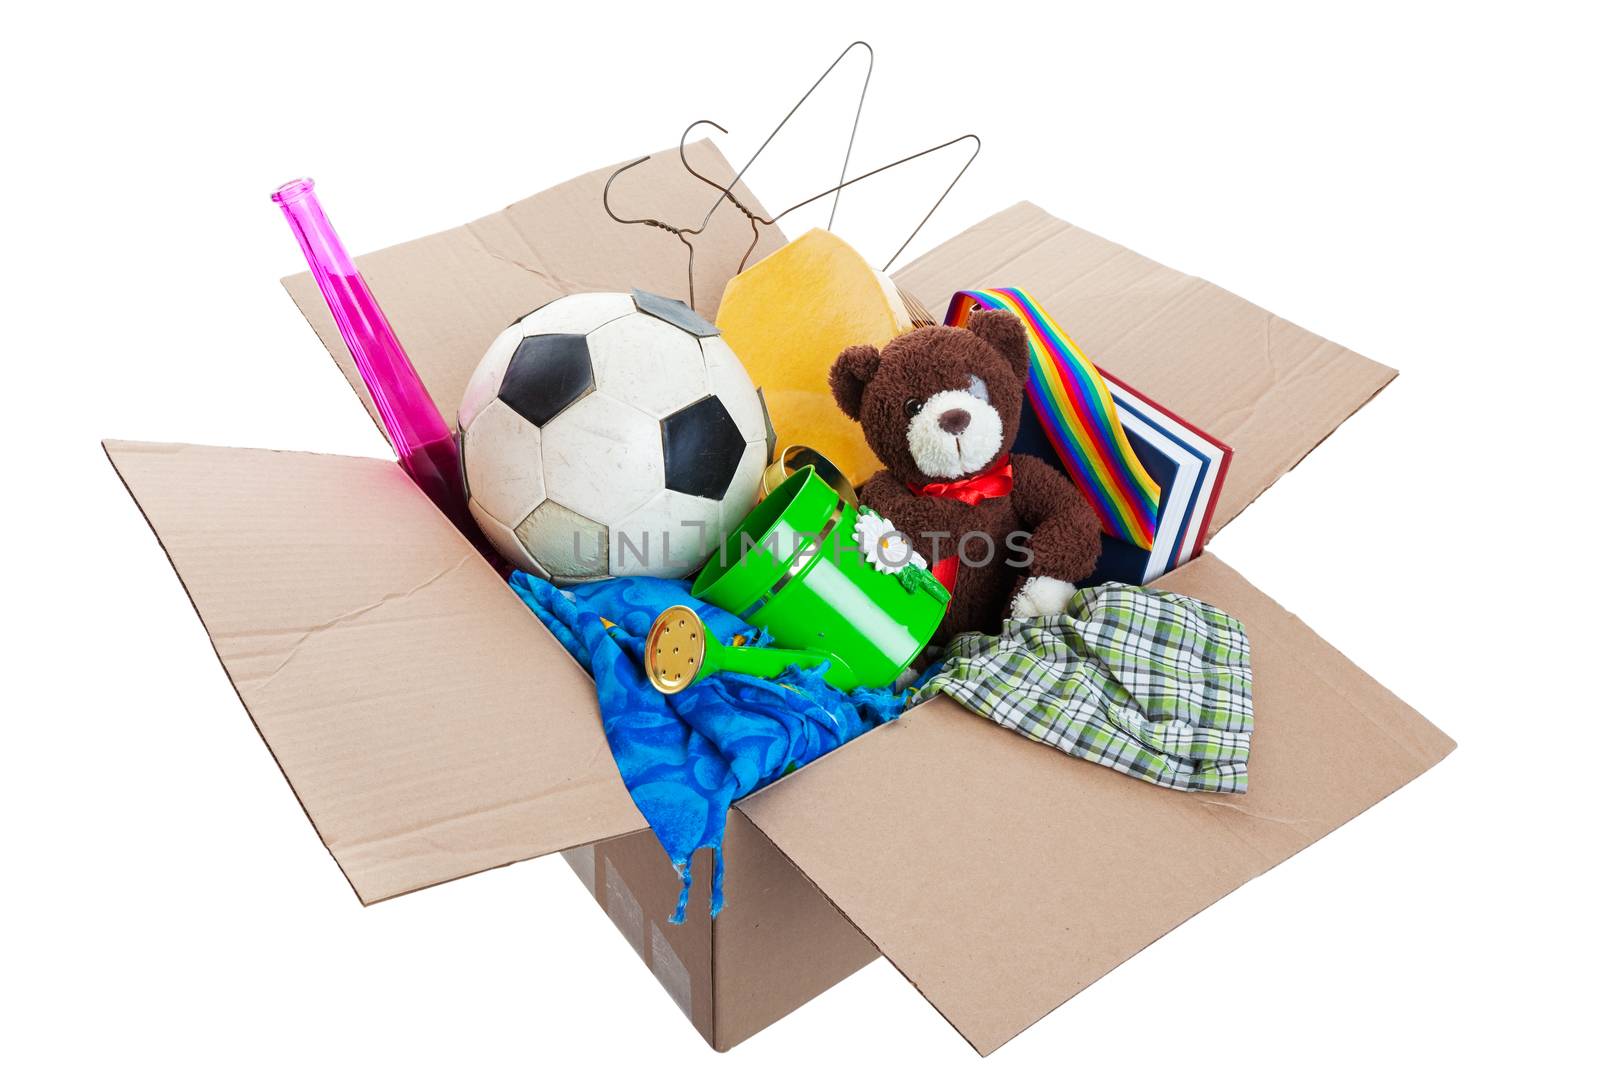 A box of unwanted stuff ready for a garage sale or to donate to a charitable organization.  Shot on white background.